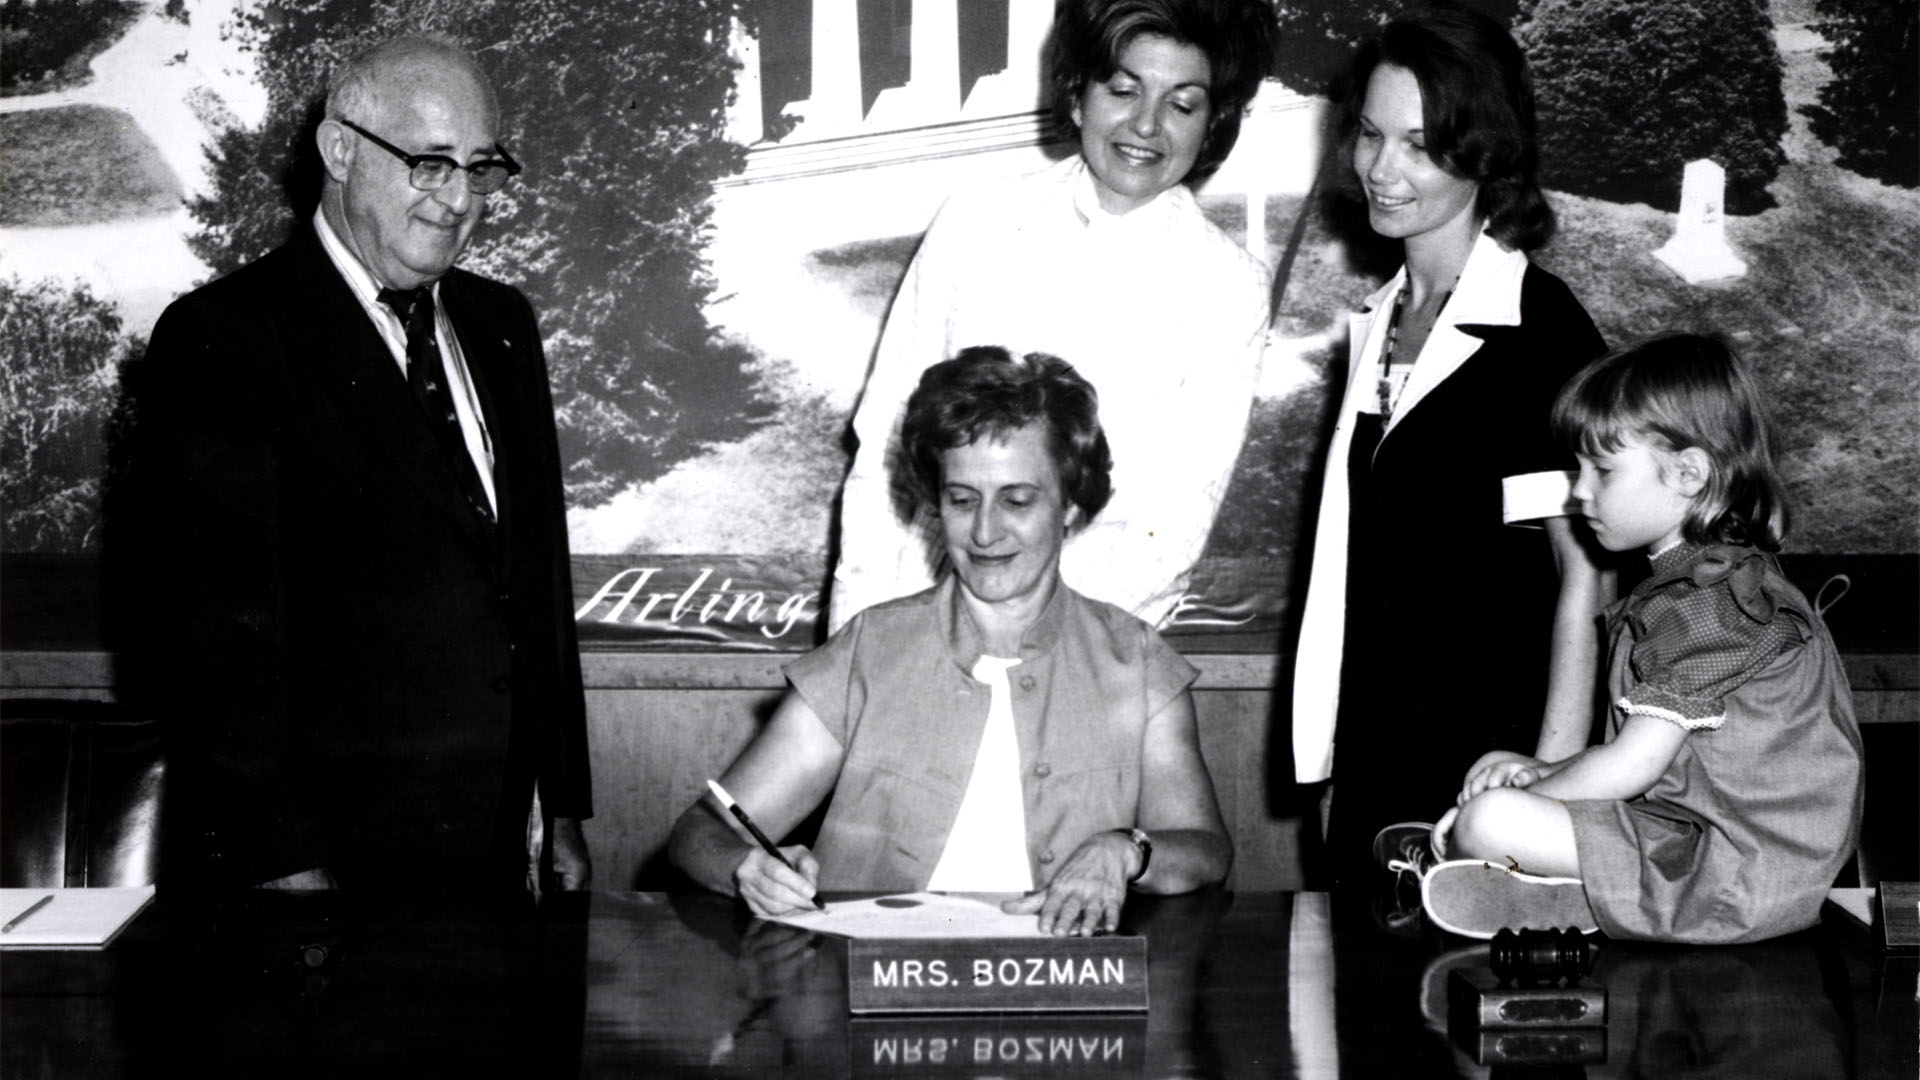 Ellen Bozman working in the County board room, surrounded by a man, two women and a child sitting on the desk